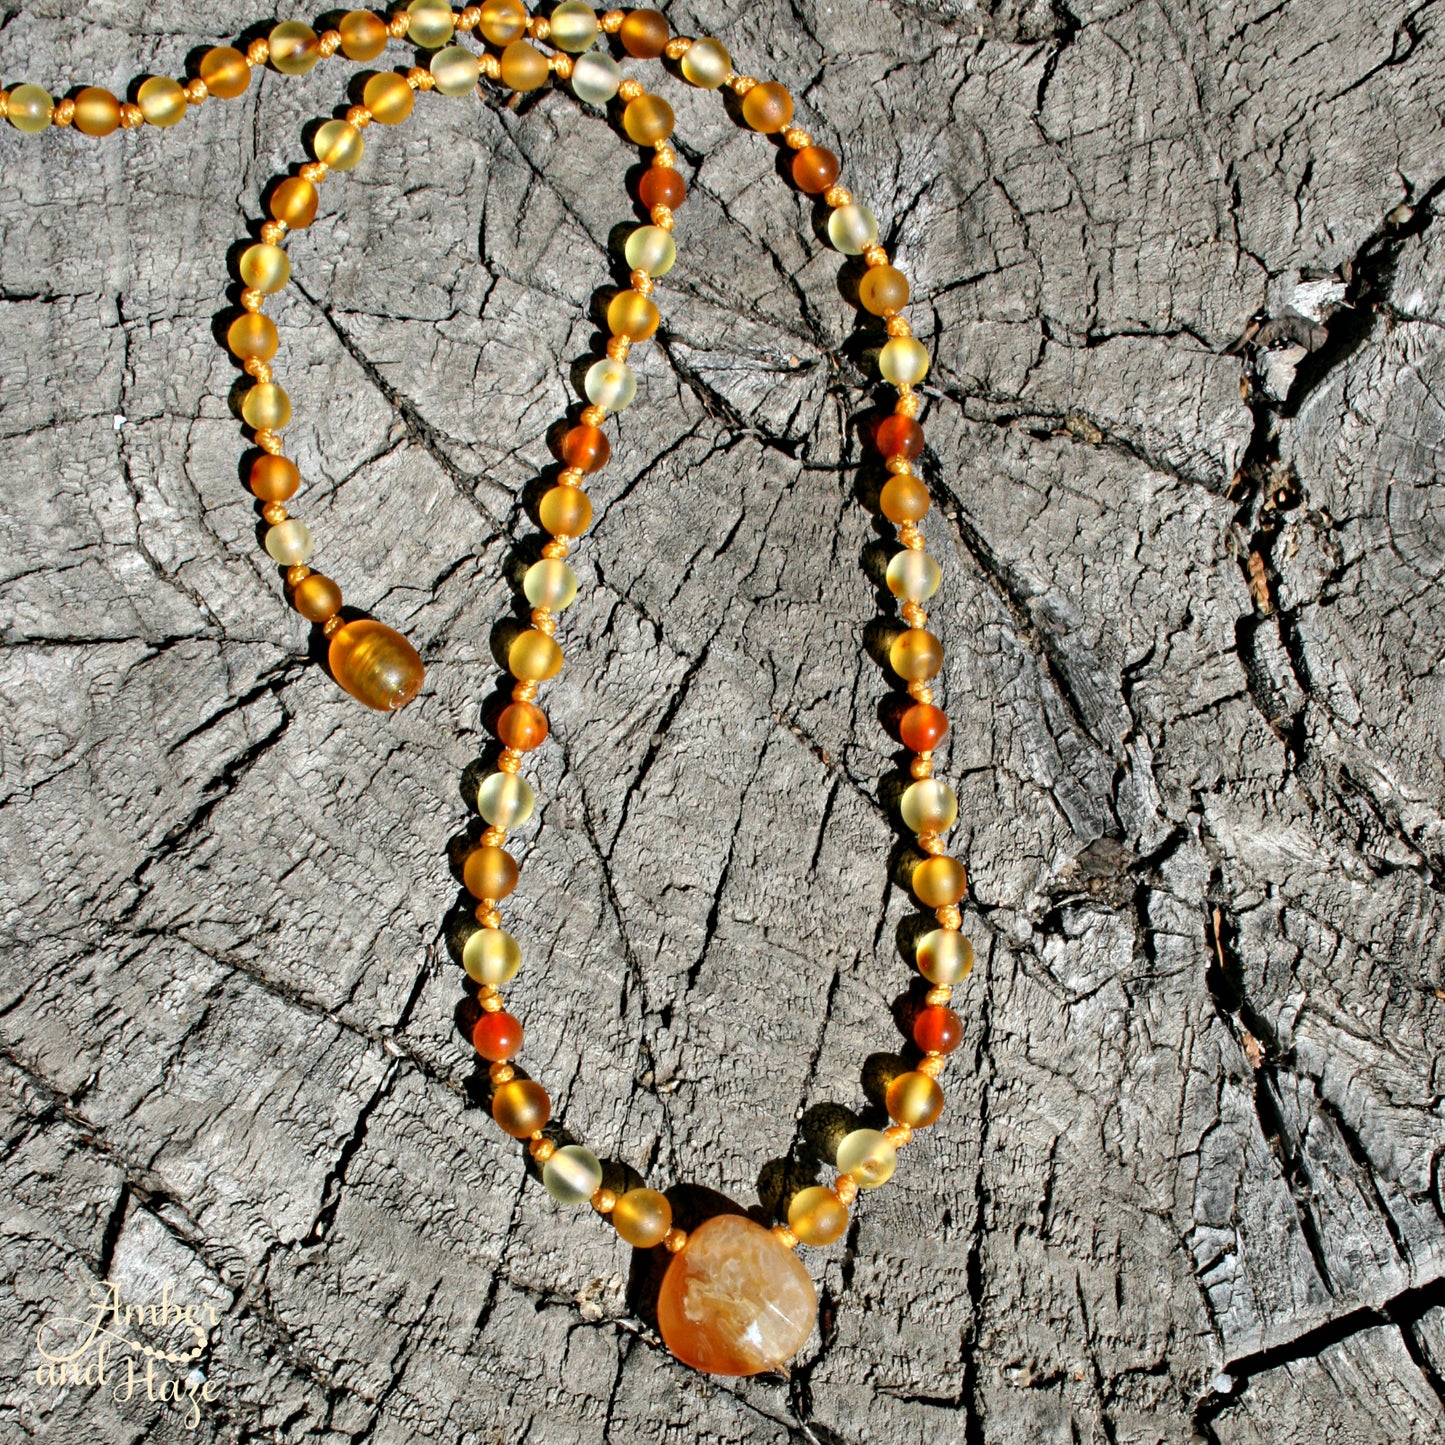 Carnelian Pendant and Beads with Lemon and Honey Colored Baltic Amber 18"